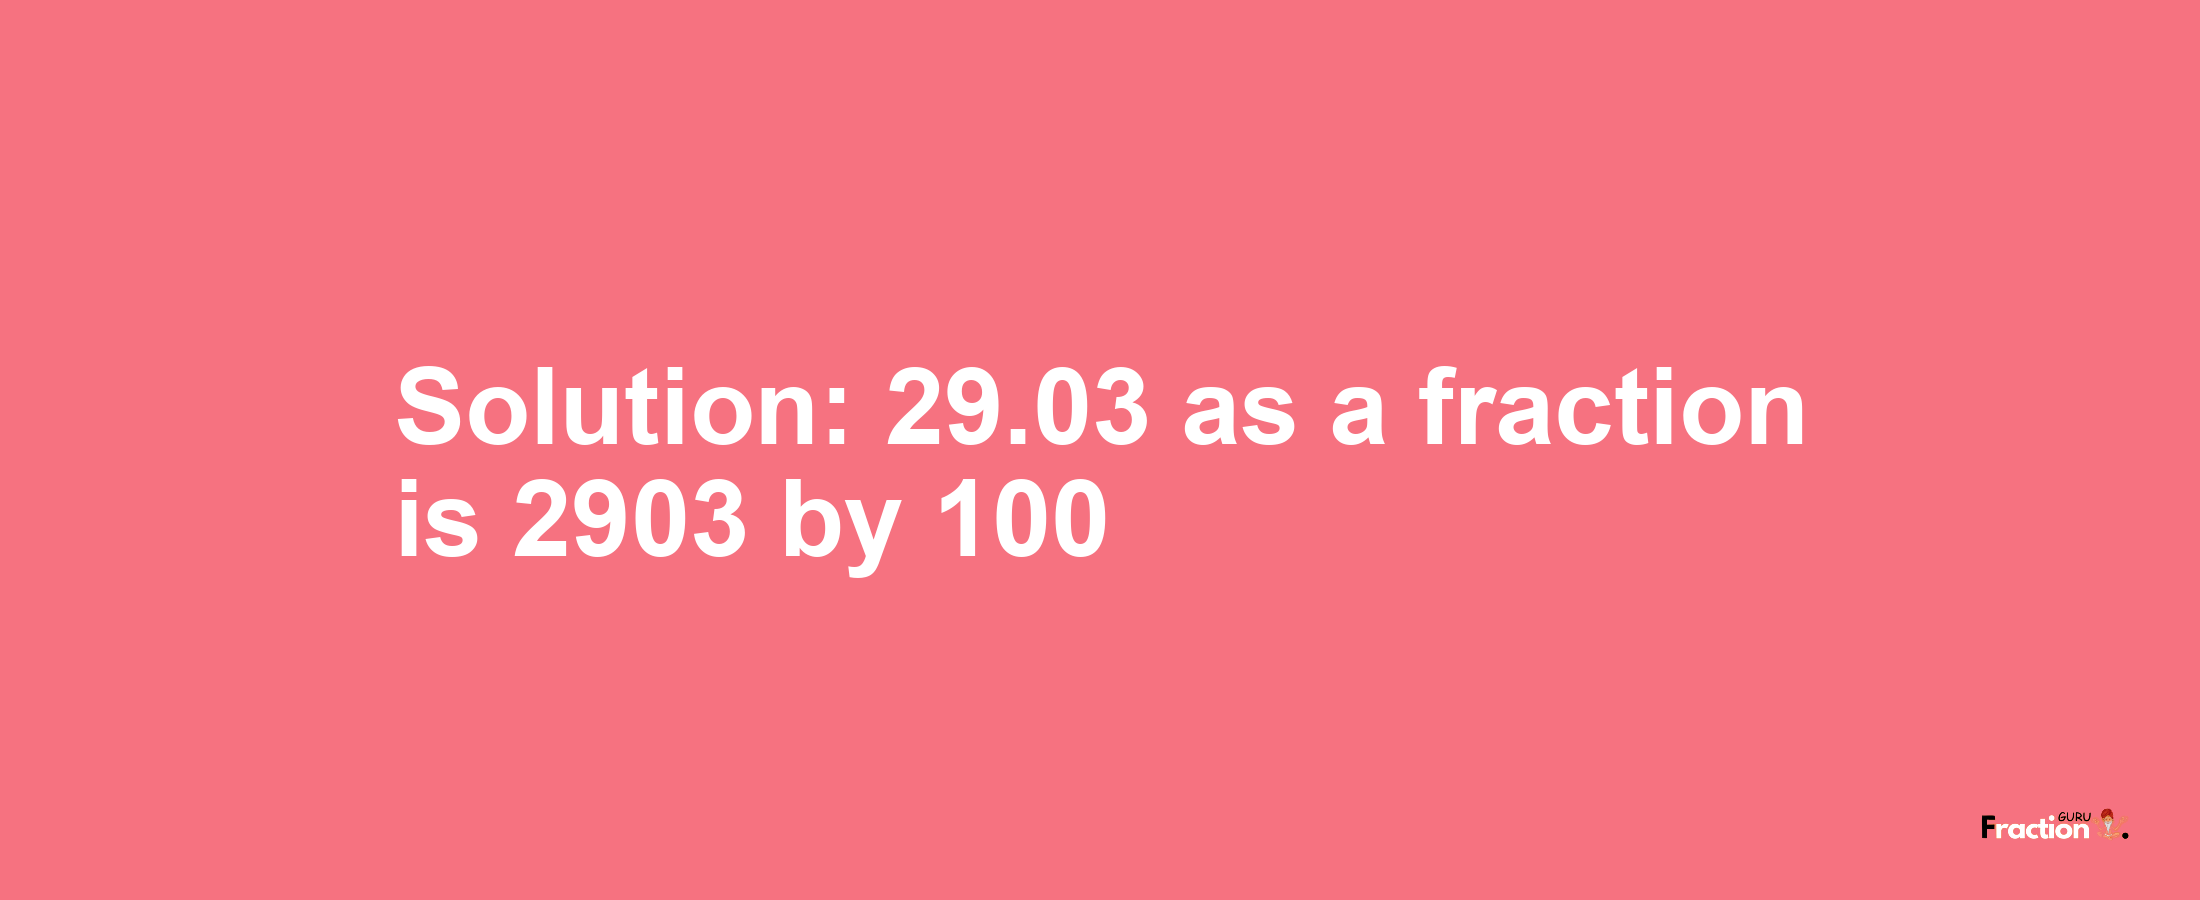 Solution:29.03 as a fraction is 2903/100